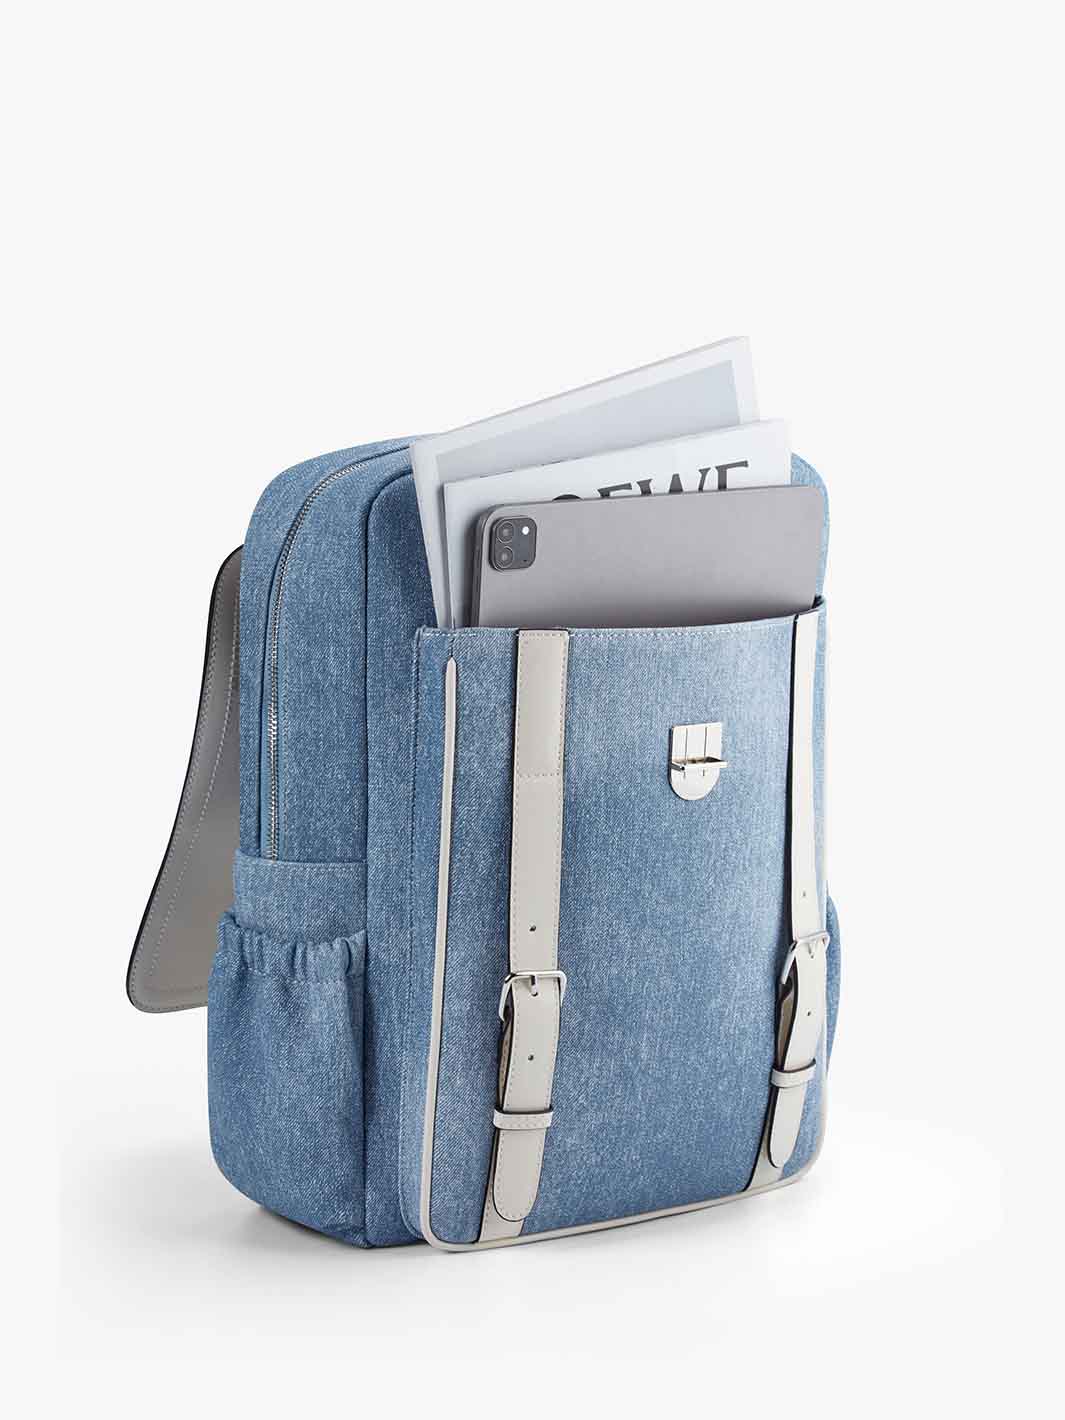 Denim-Inspired PU Fabric Backpacks for Travel with Laptop